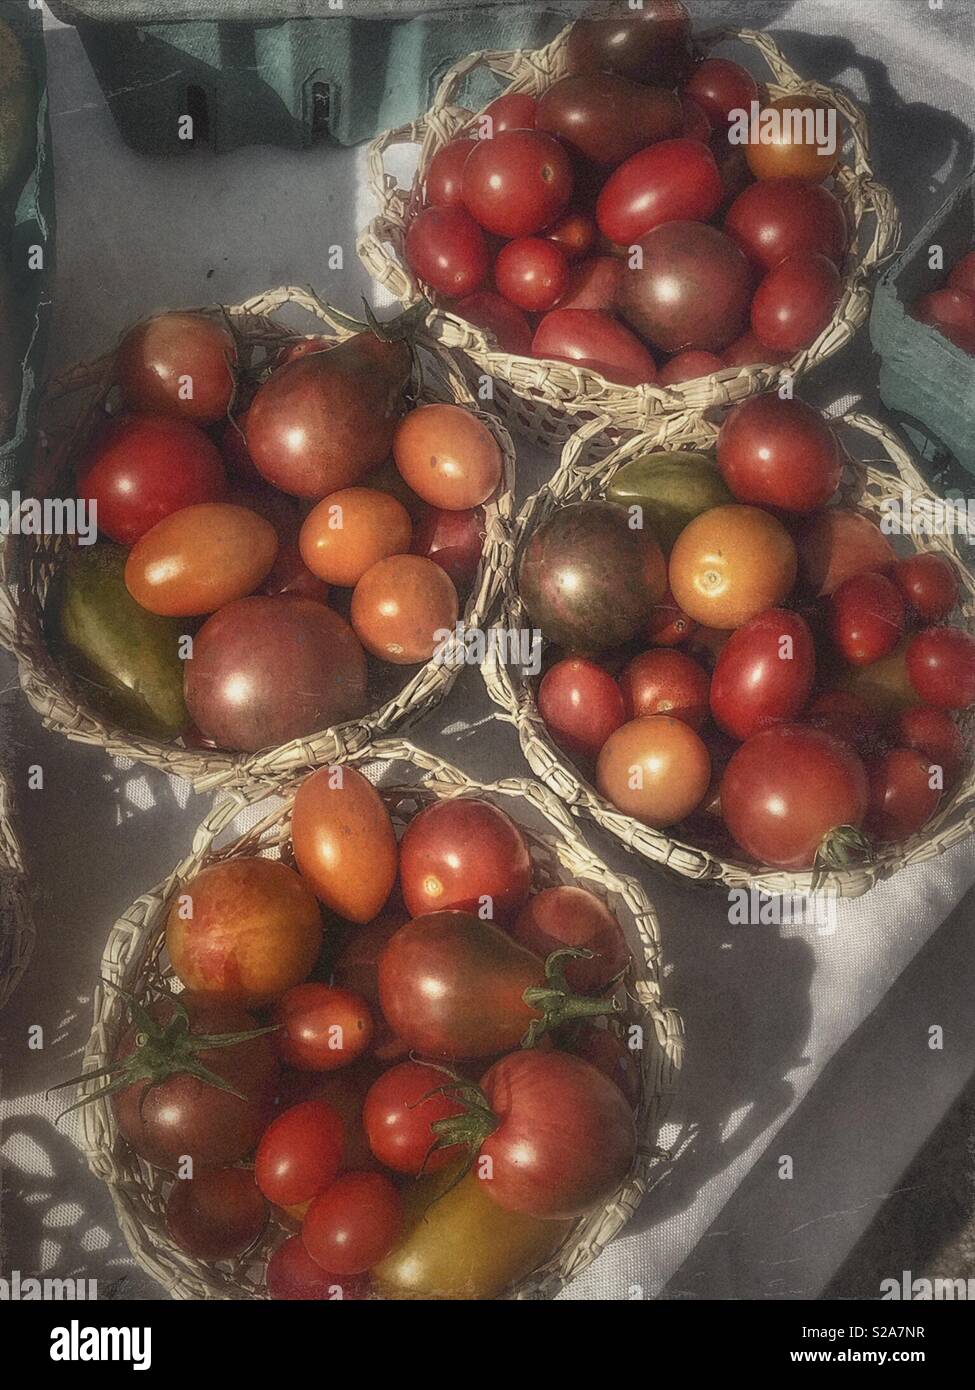 Small baskets of freshly picked tomatoes at a farmers market Stock Photo